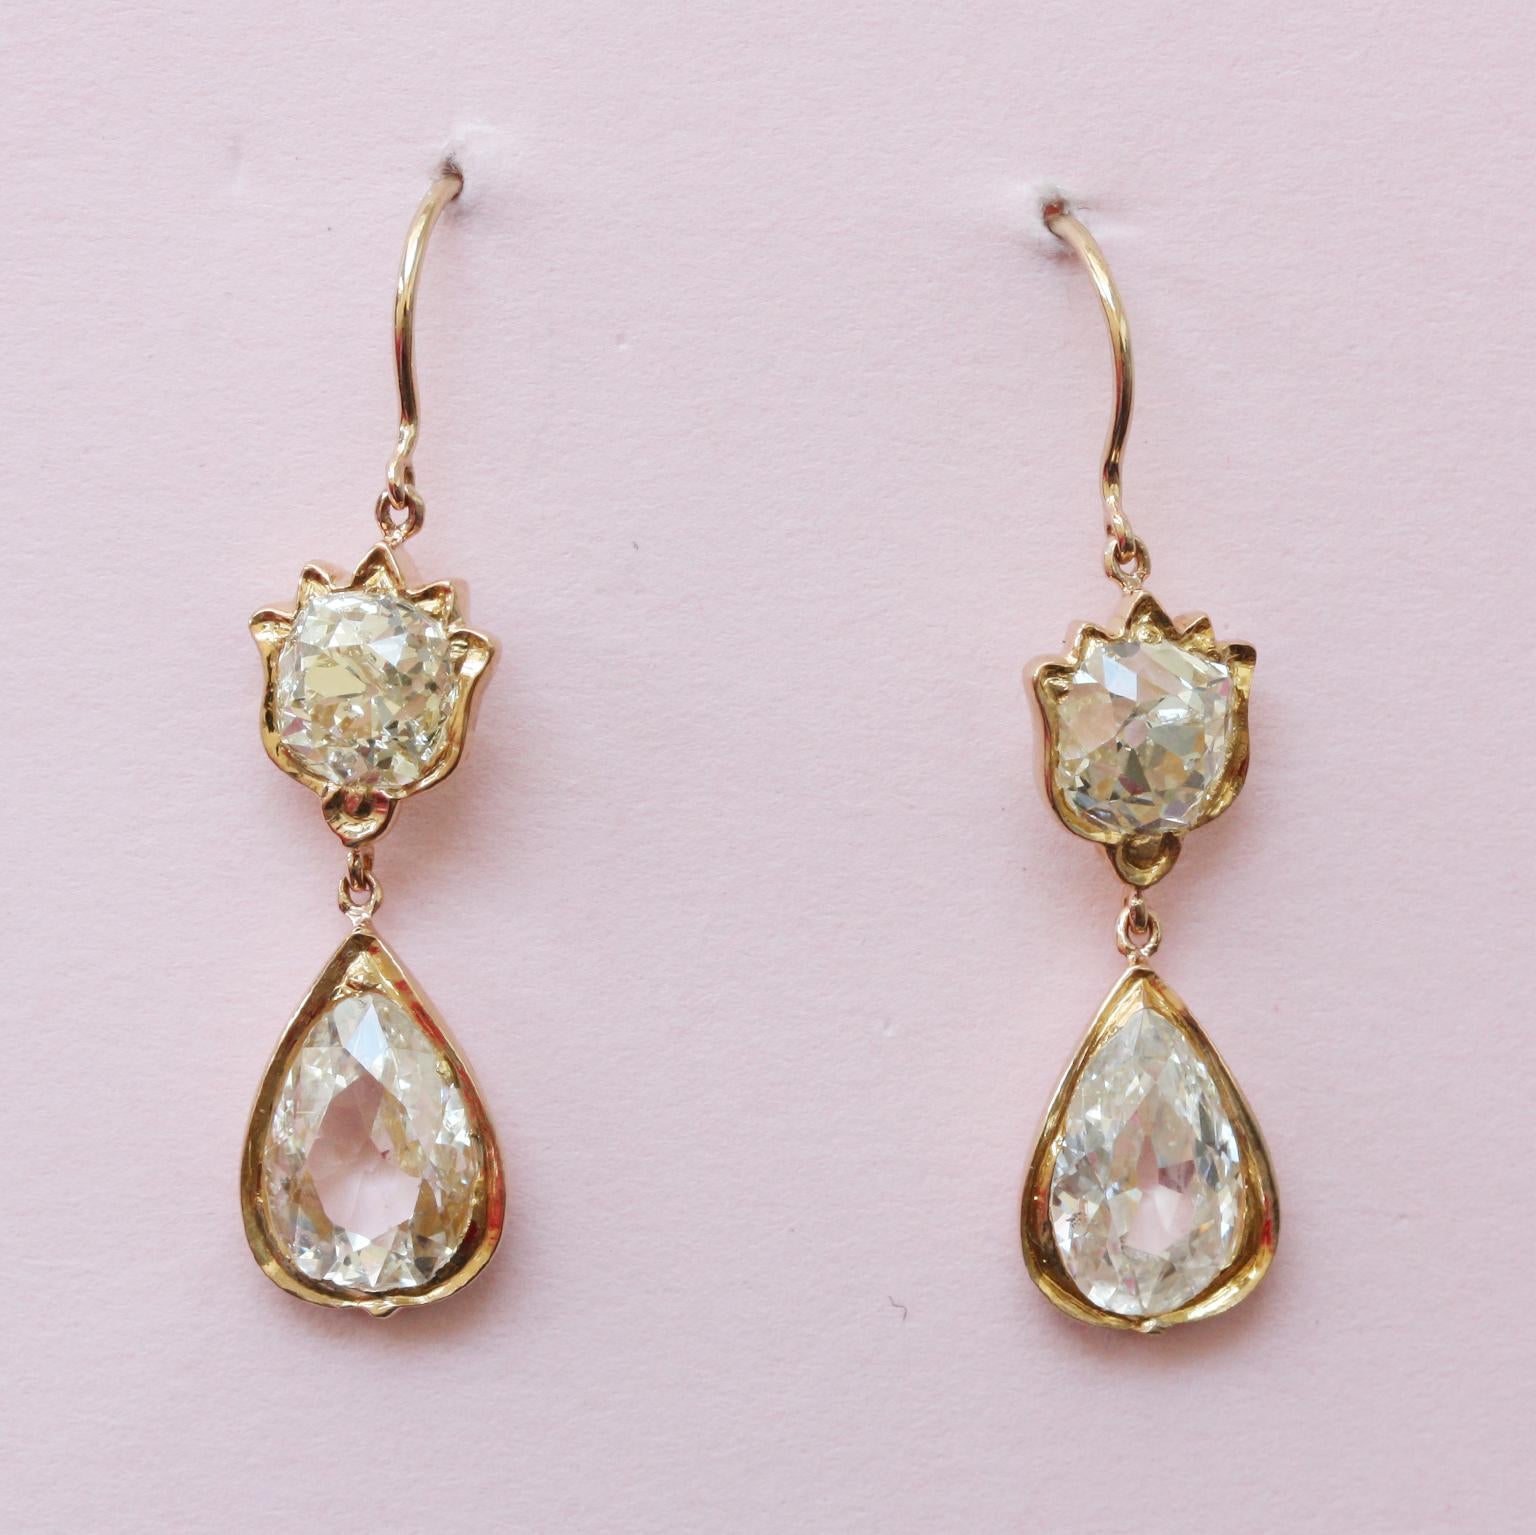 A pair of 18-carat gold earrings with an old-cut round, and a pear-shaped diamonds (app. 5.4 carats in total) with gold tulip decorations. The watery diamonds used in Indonesian jewellery mostly came from Borneo and the stones were often cut in